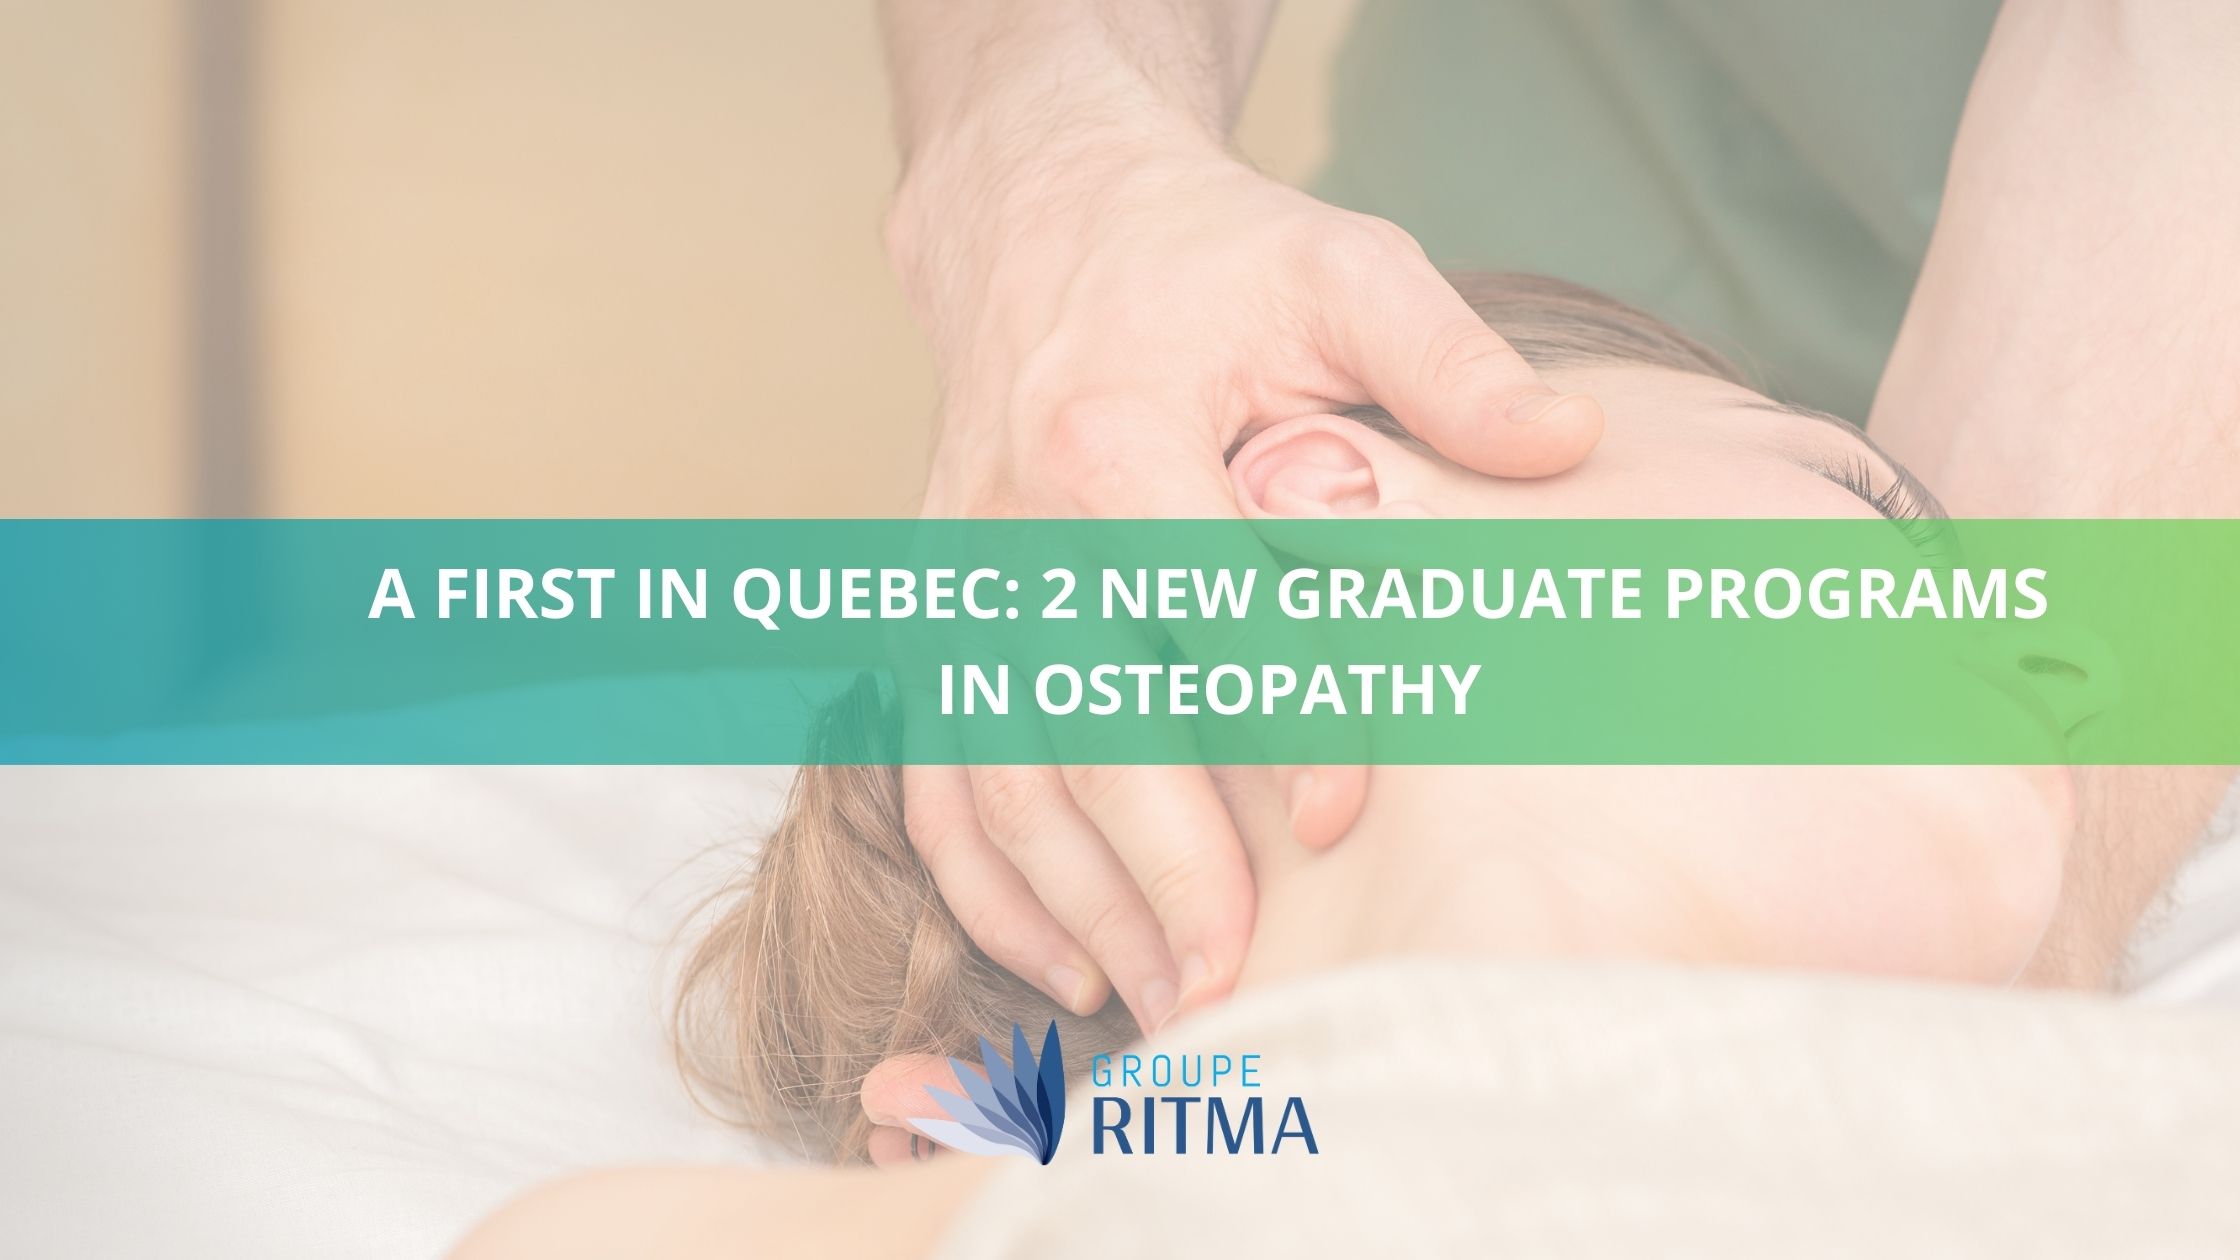 A First in Quebec: 2 New Graduate Programs in Osteopathy